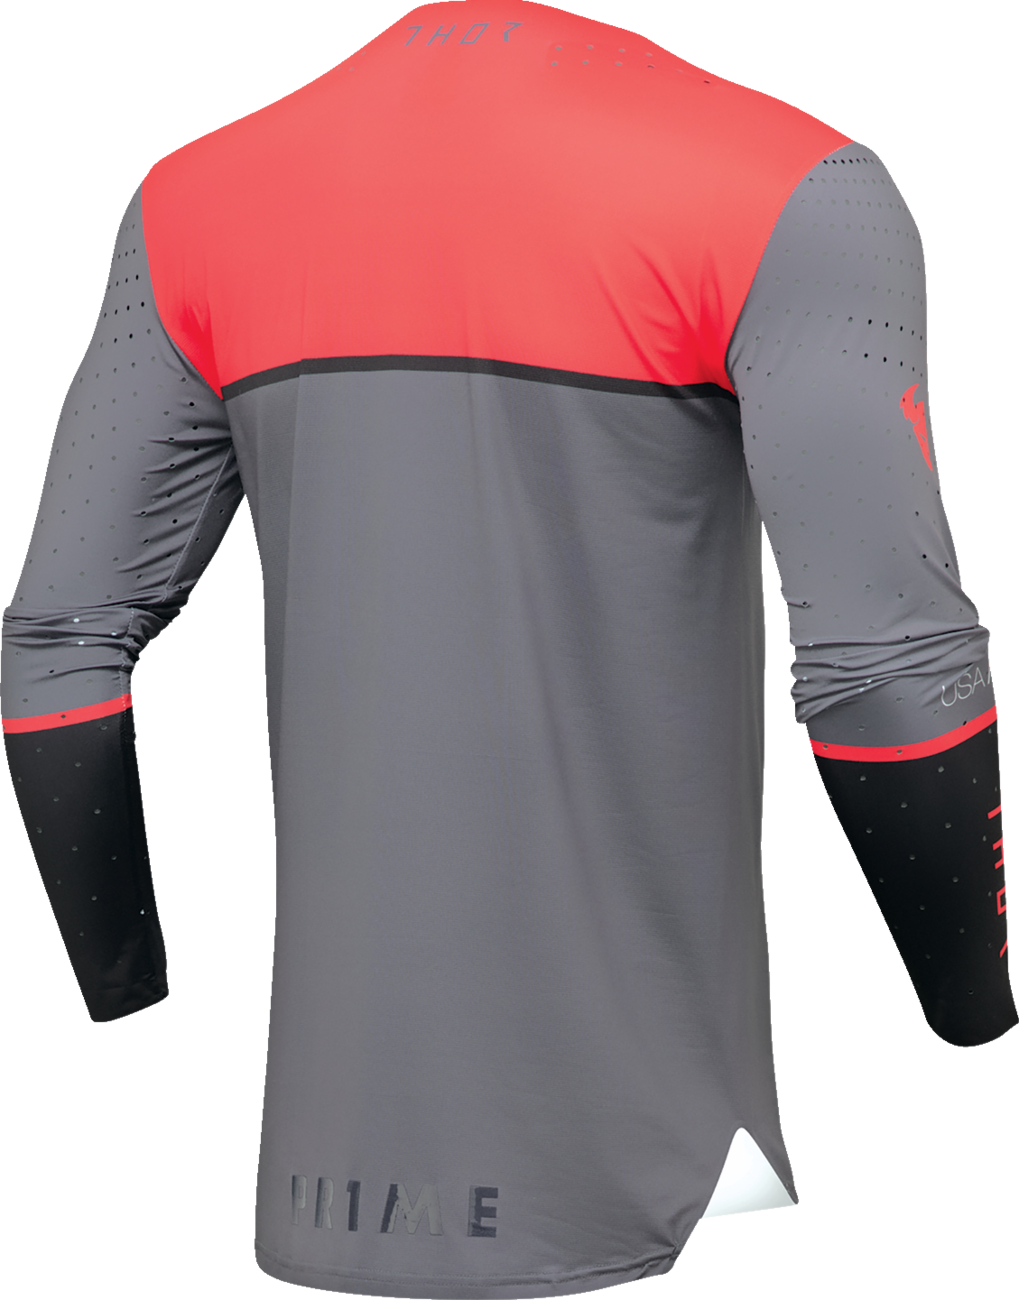 THOR Prime Ace Jersey - Charcoal/Black - 3XL 2910-7664